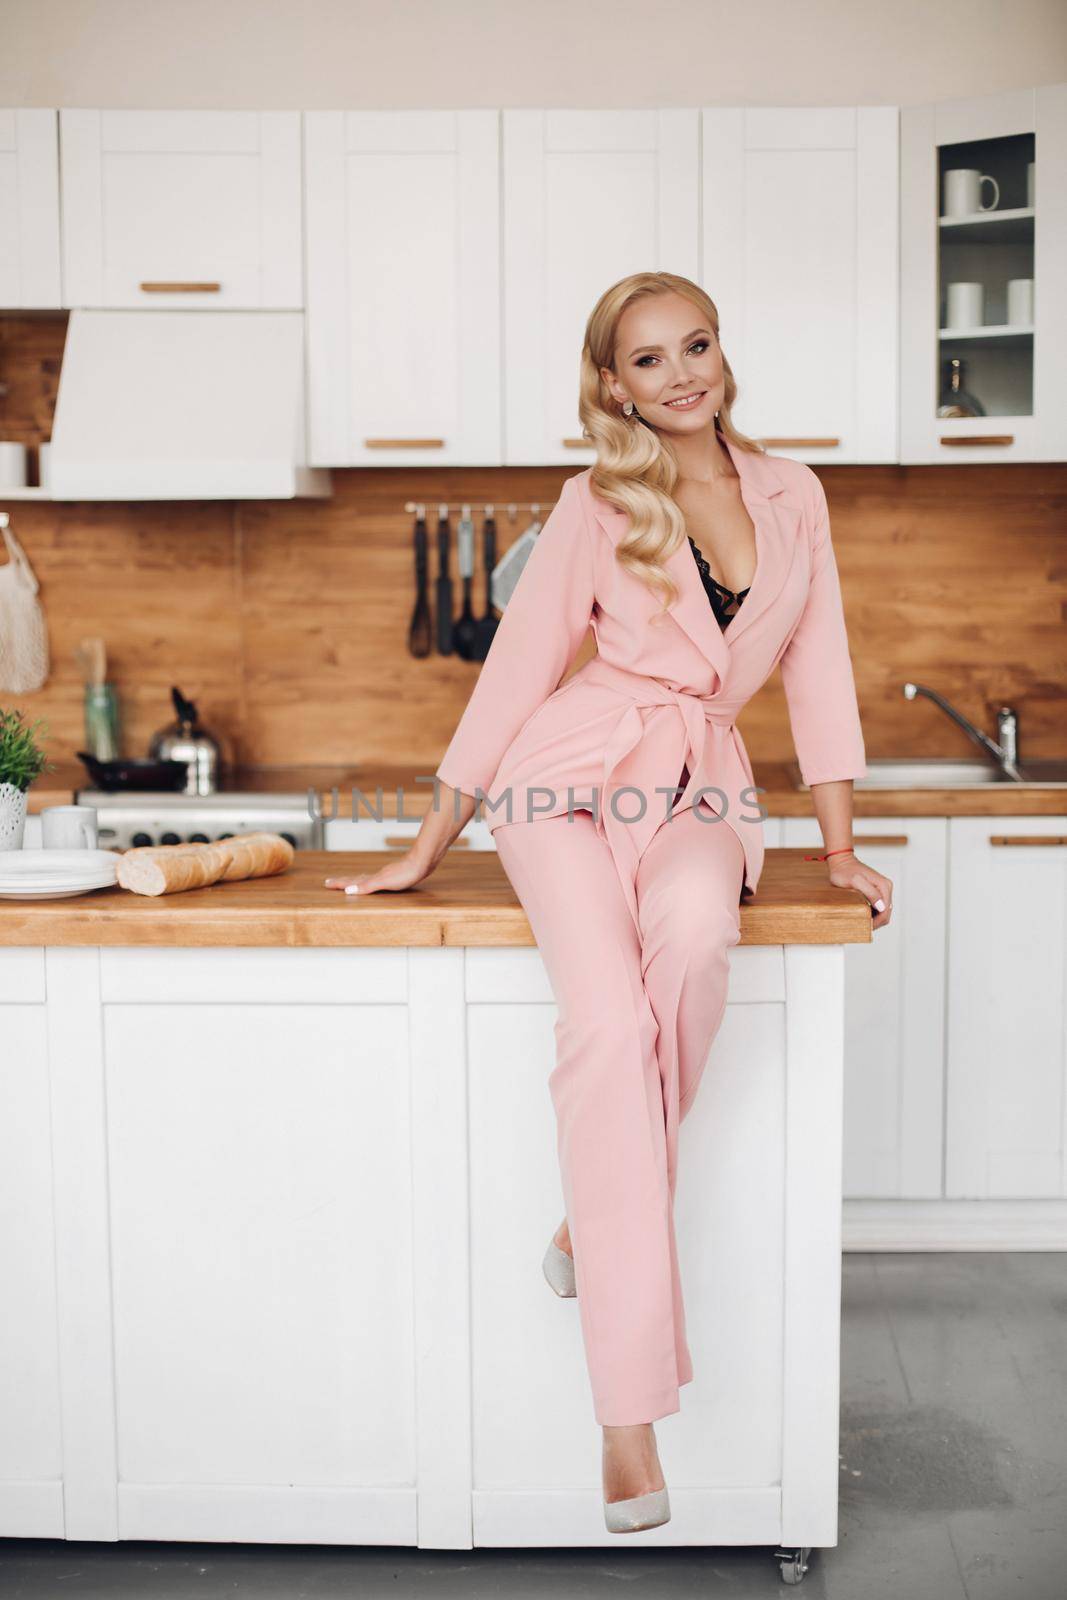 Gorgeous blonde woman in pink suit with loaf of bread on kitchen countrer. by StudioLucky